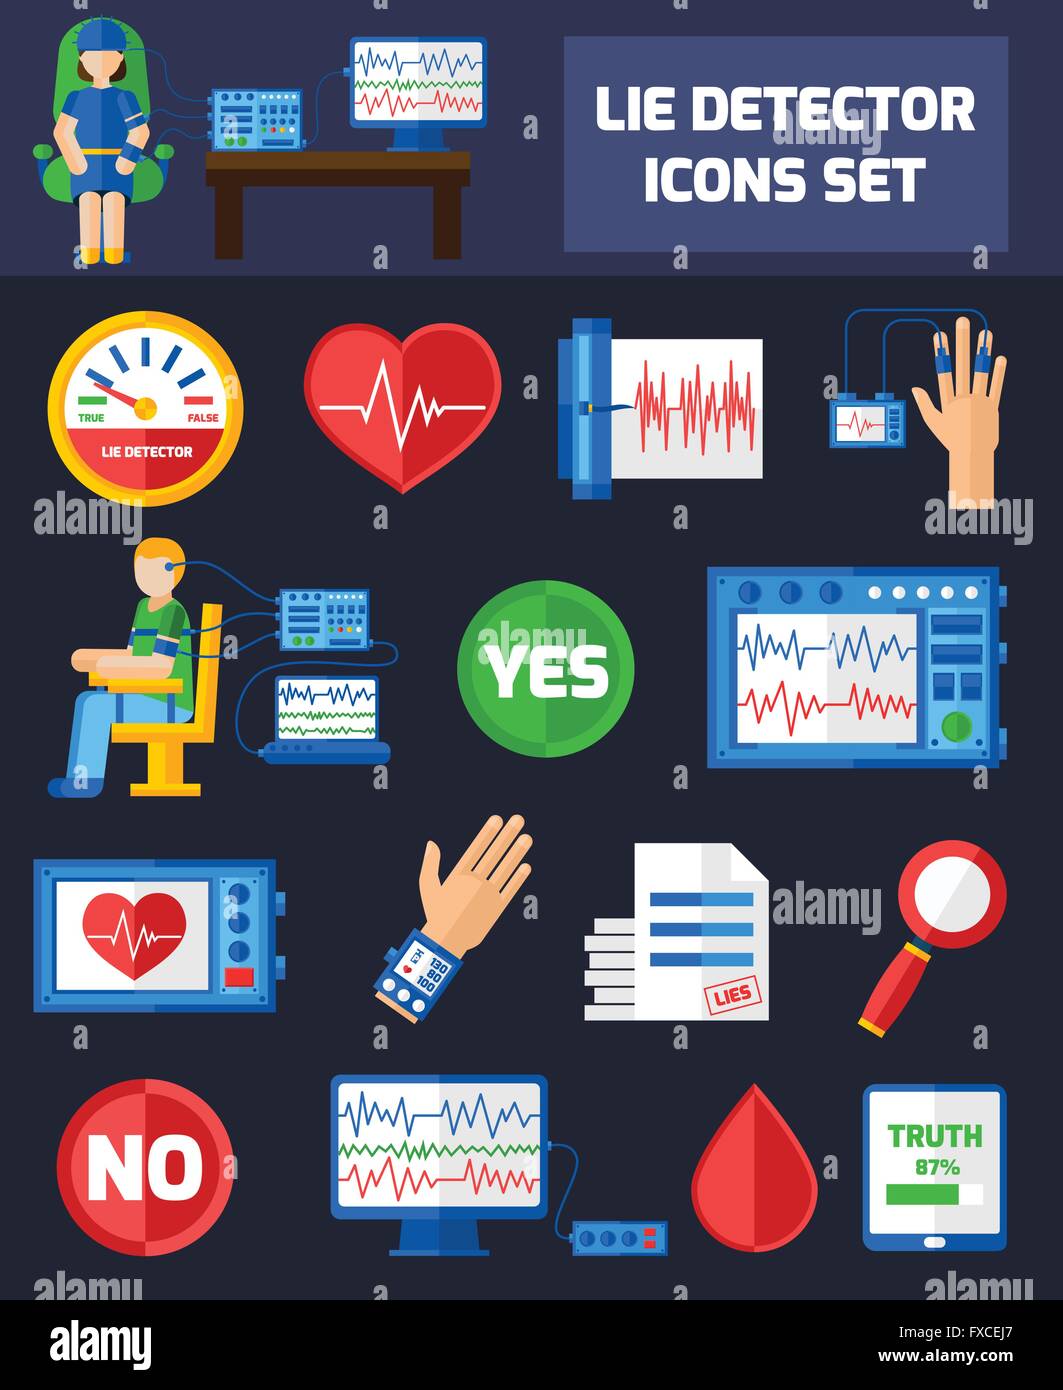 Lie Detector Icons Stock Vector